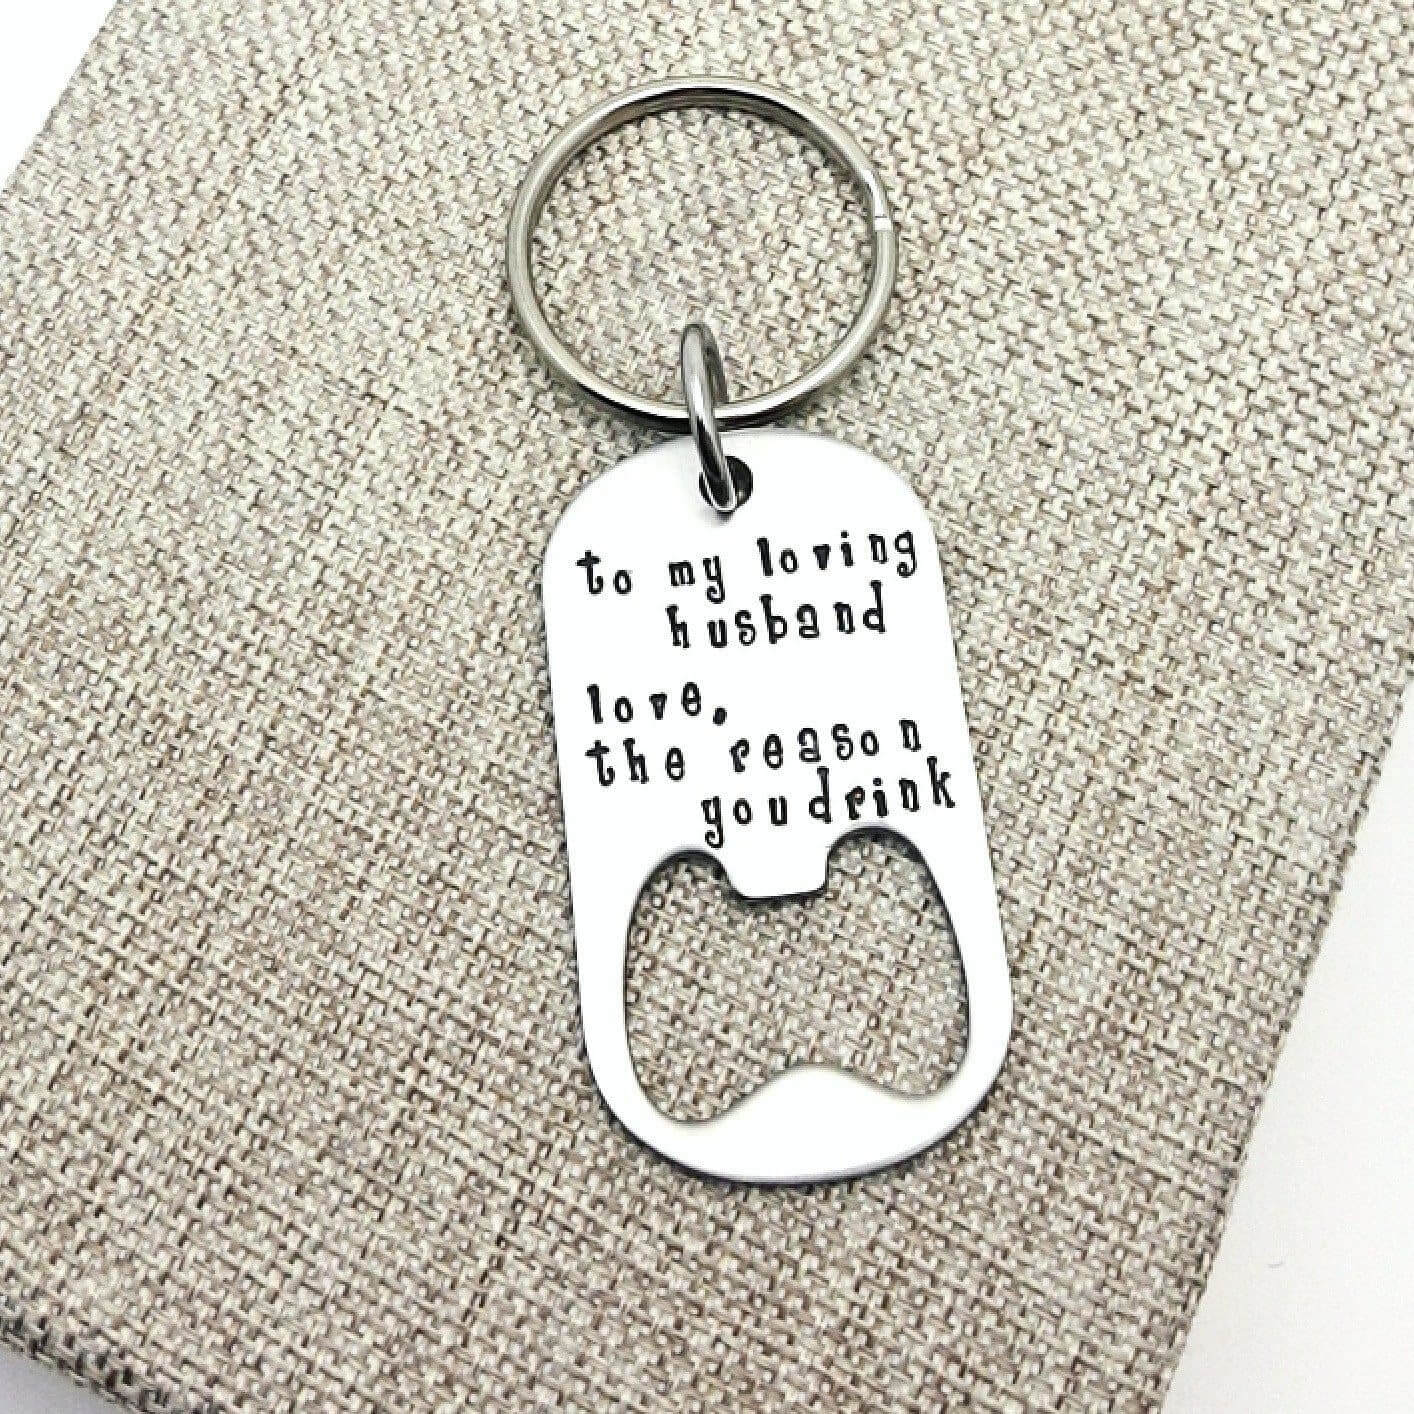 Loving Husband's Bottle Opener Keychain, #1 Hubby, Fathers Day Gift, Gift for Dad, Gift for Husba, Bottle Openers, HandmadeLoveStories, HandmadeLoveStories , [Handmade_Love_Stories], [Hand_Stamped_Jewelry], [Etsy_Stamped_Jewelry], [Etsy_Jewelry]